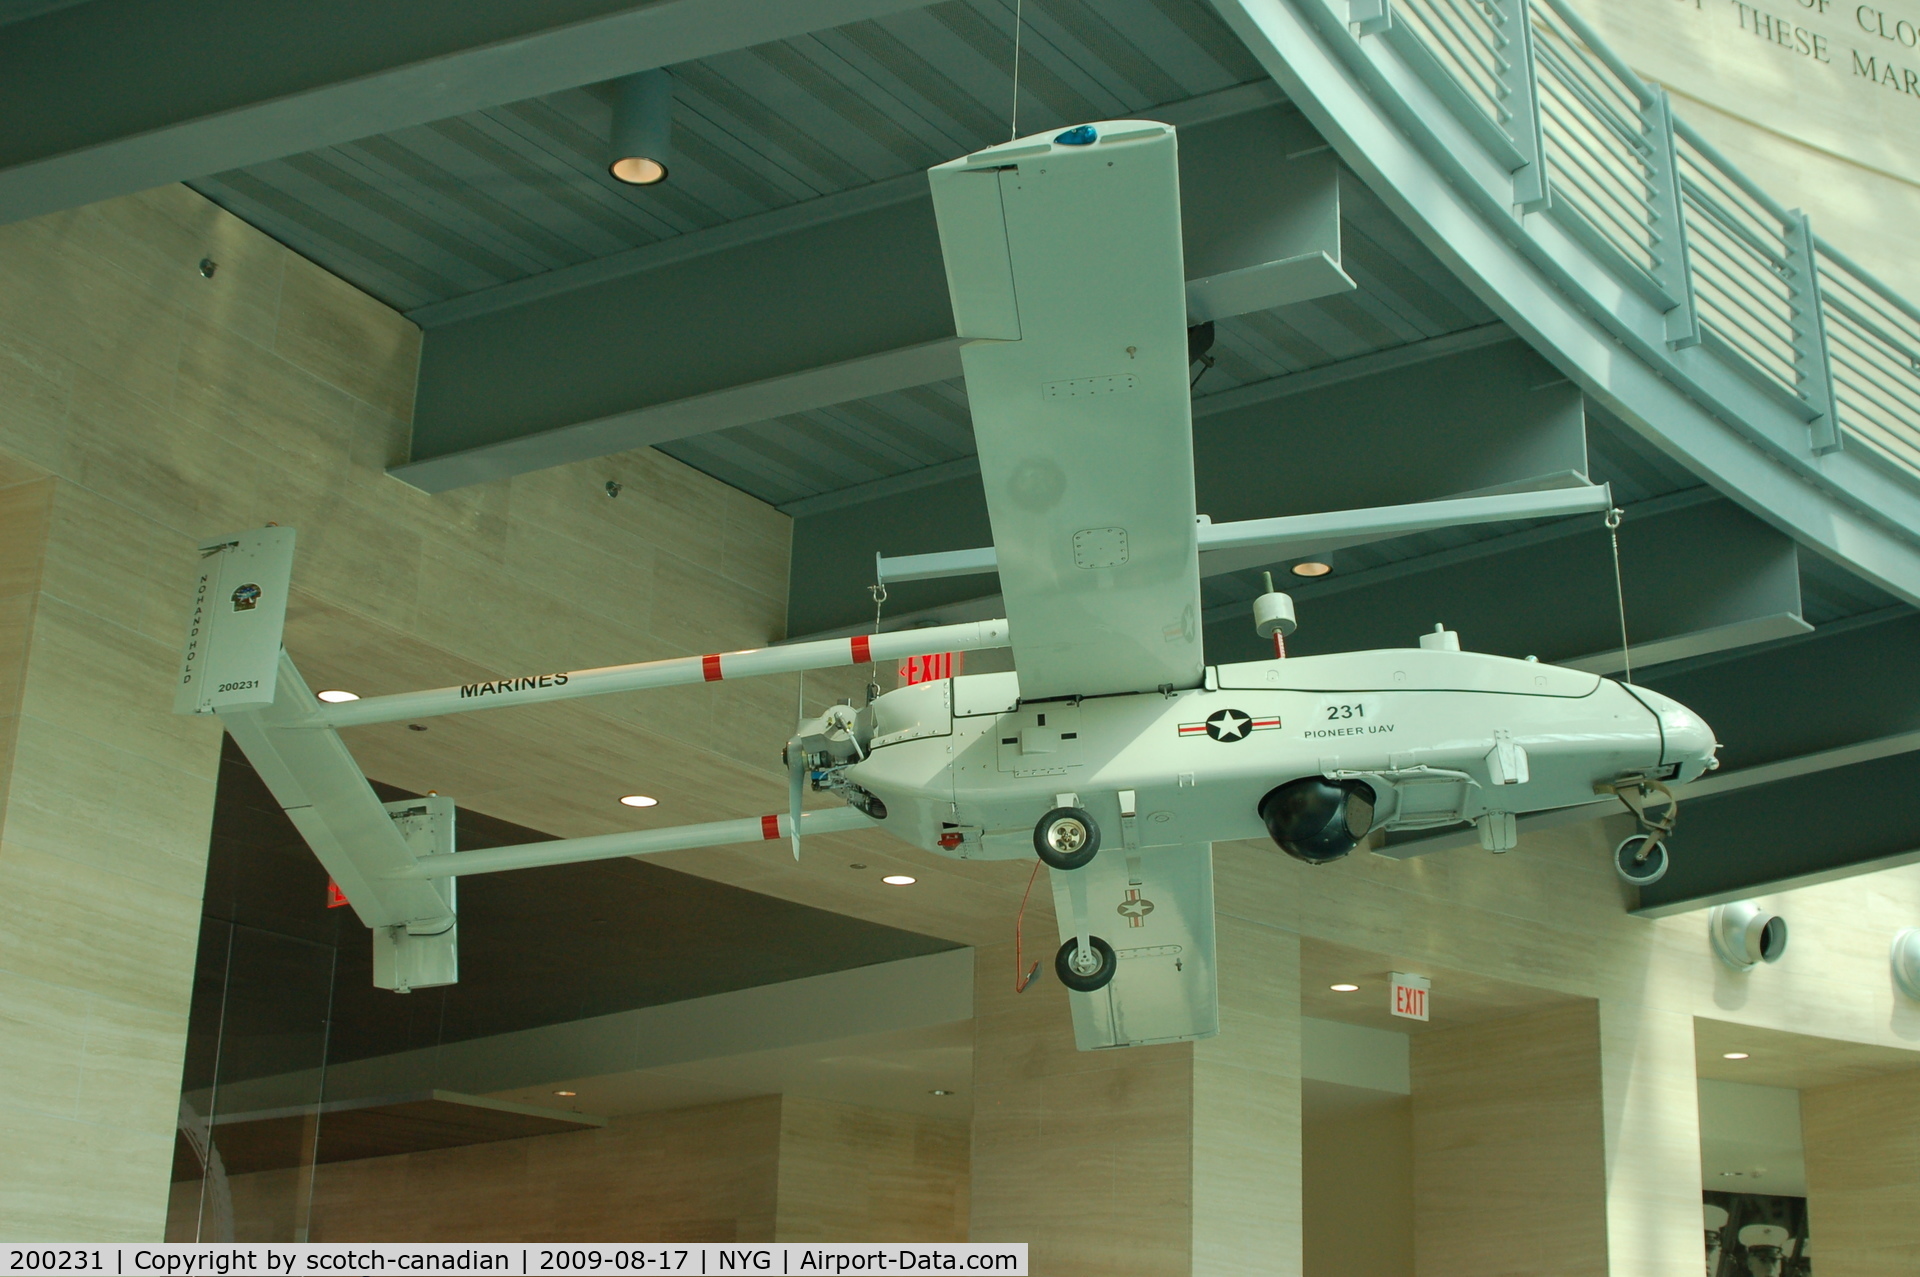 200231, Israel Aircraft Industries RQ-2 Pioneer C/N Not found 200231, RQ-2 Pioneer Unmanned Aerial Vehicle (UAV), Leatherneck Gallery, National Museum of the Marine Corps, Triangle, VA